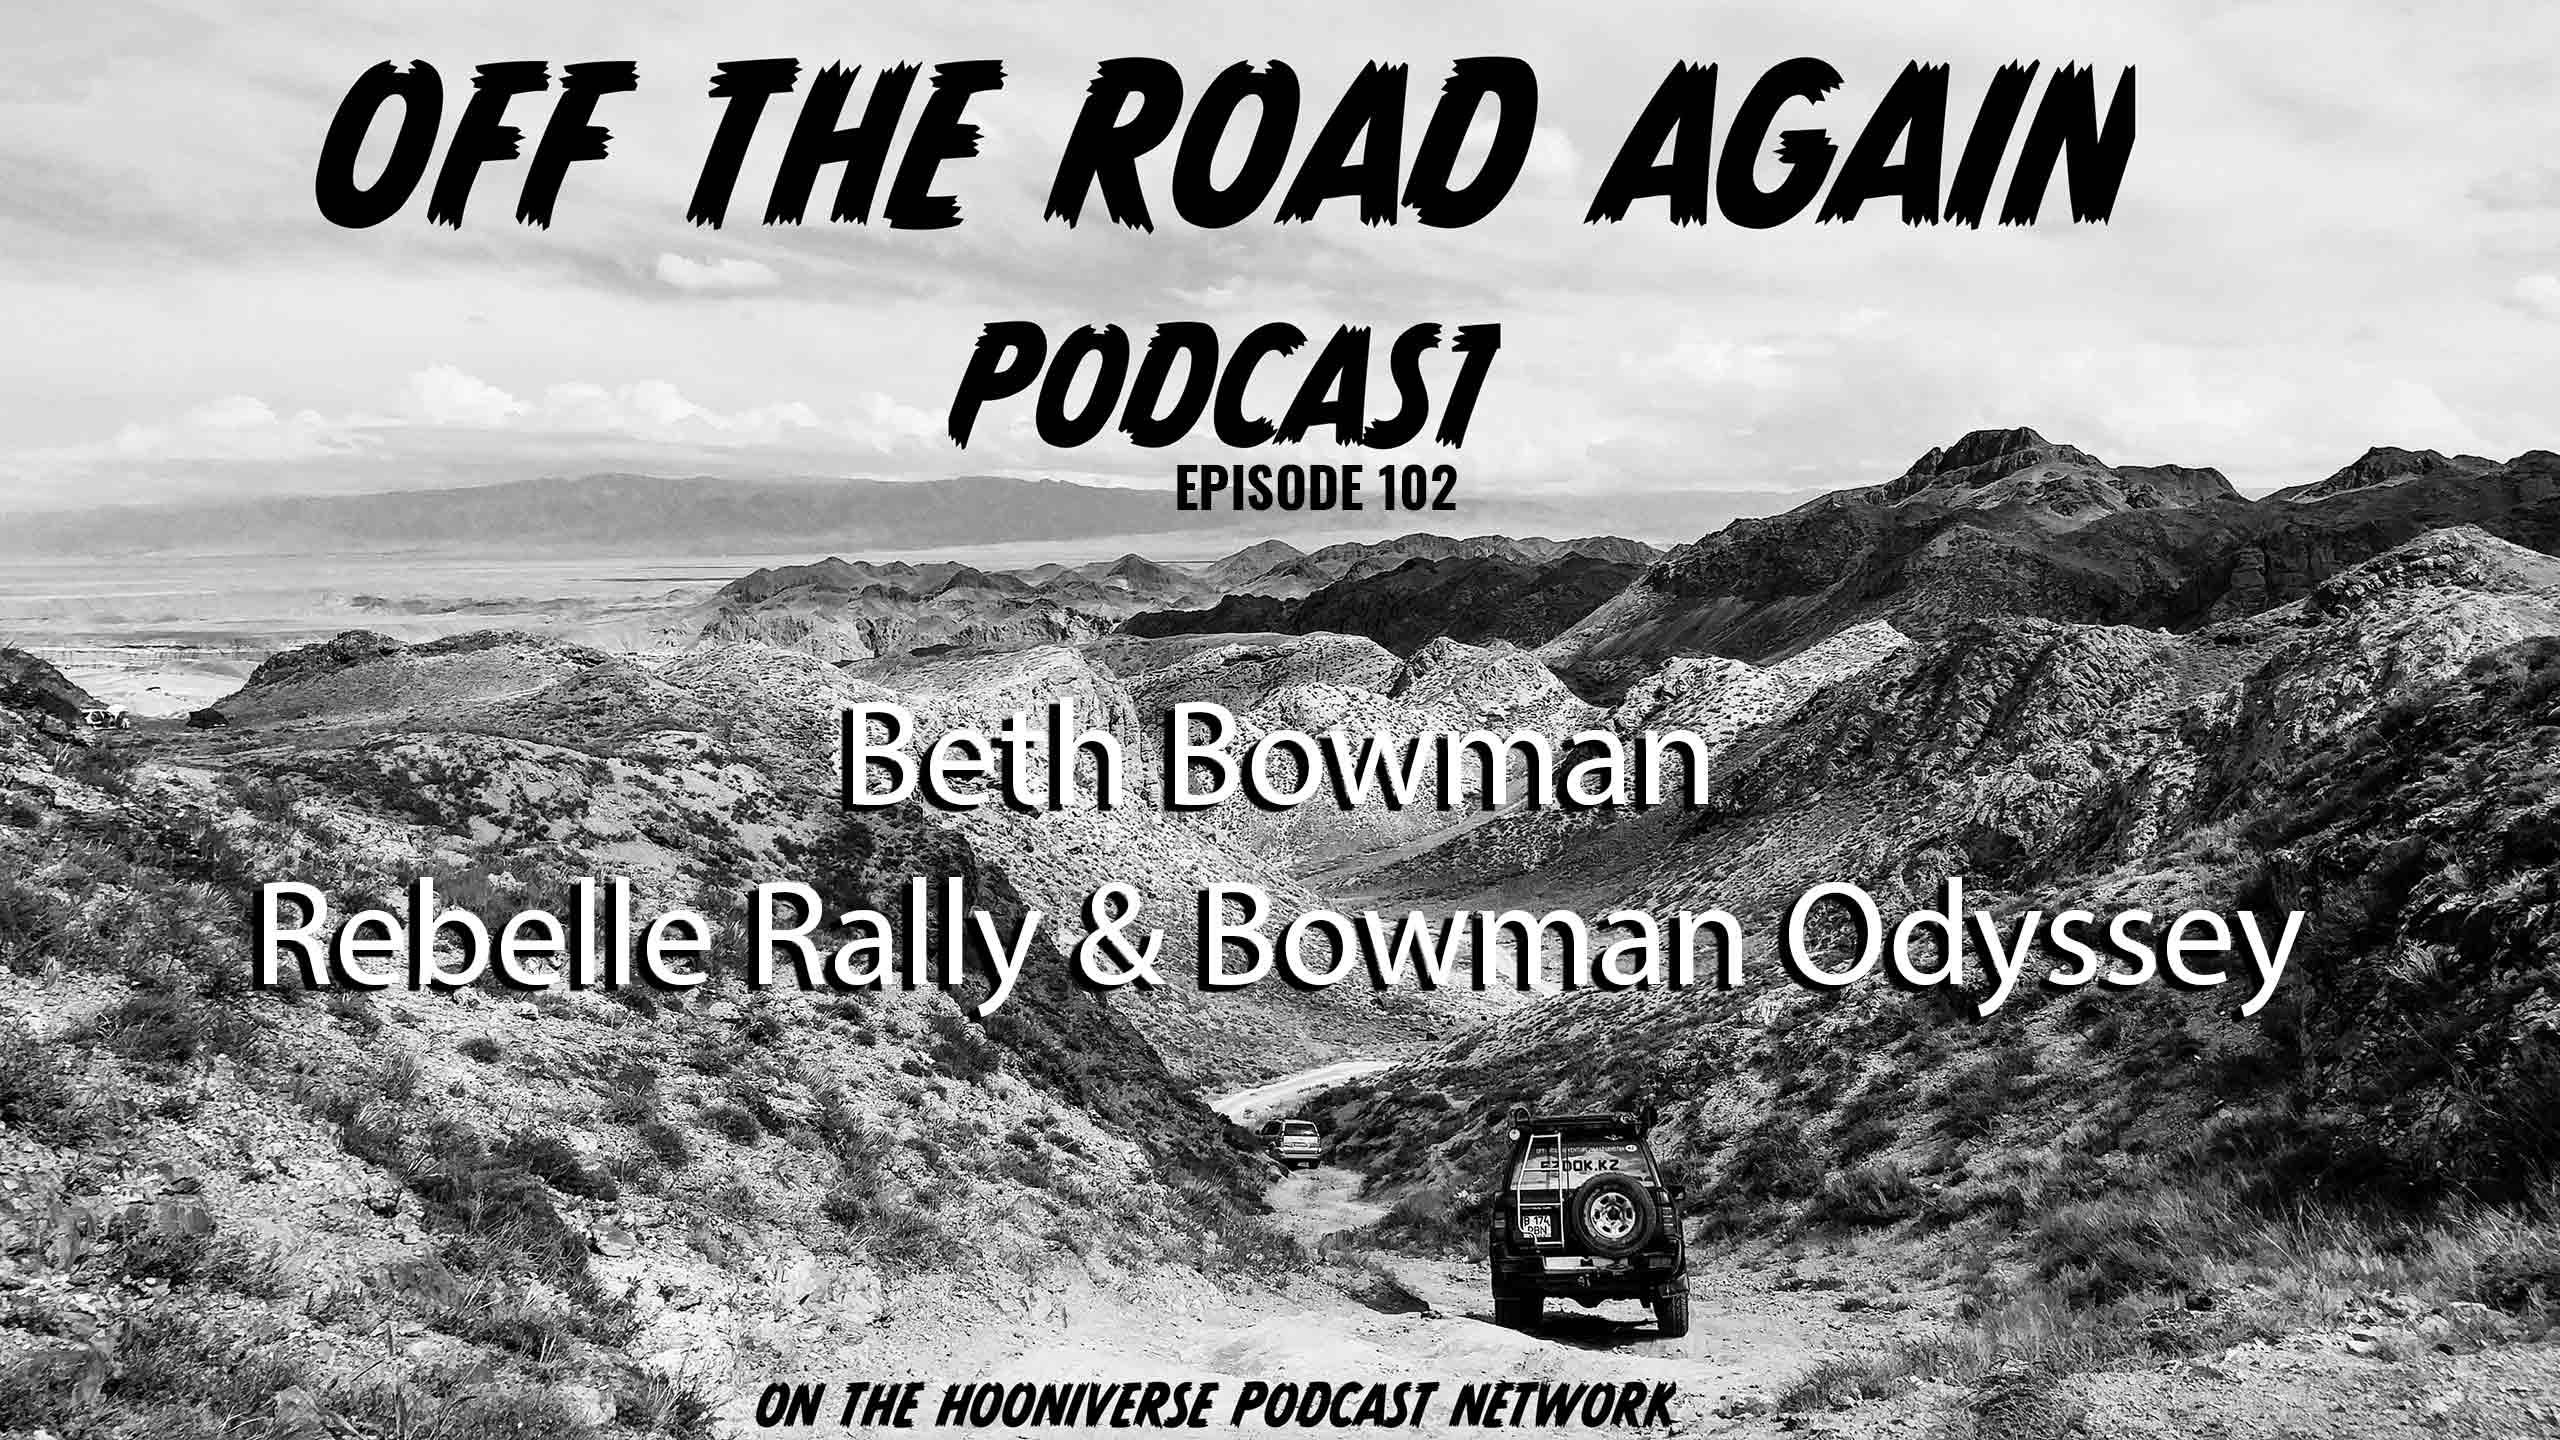 Beth-Bowman-Rebelle-Rally-Off-The-Road-Again-Podcast-Episode-102